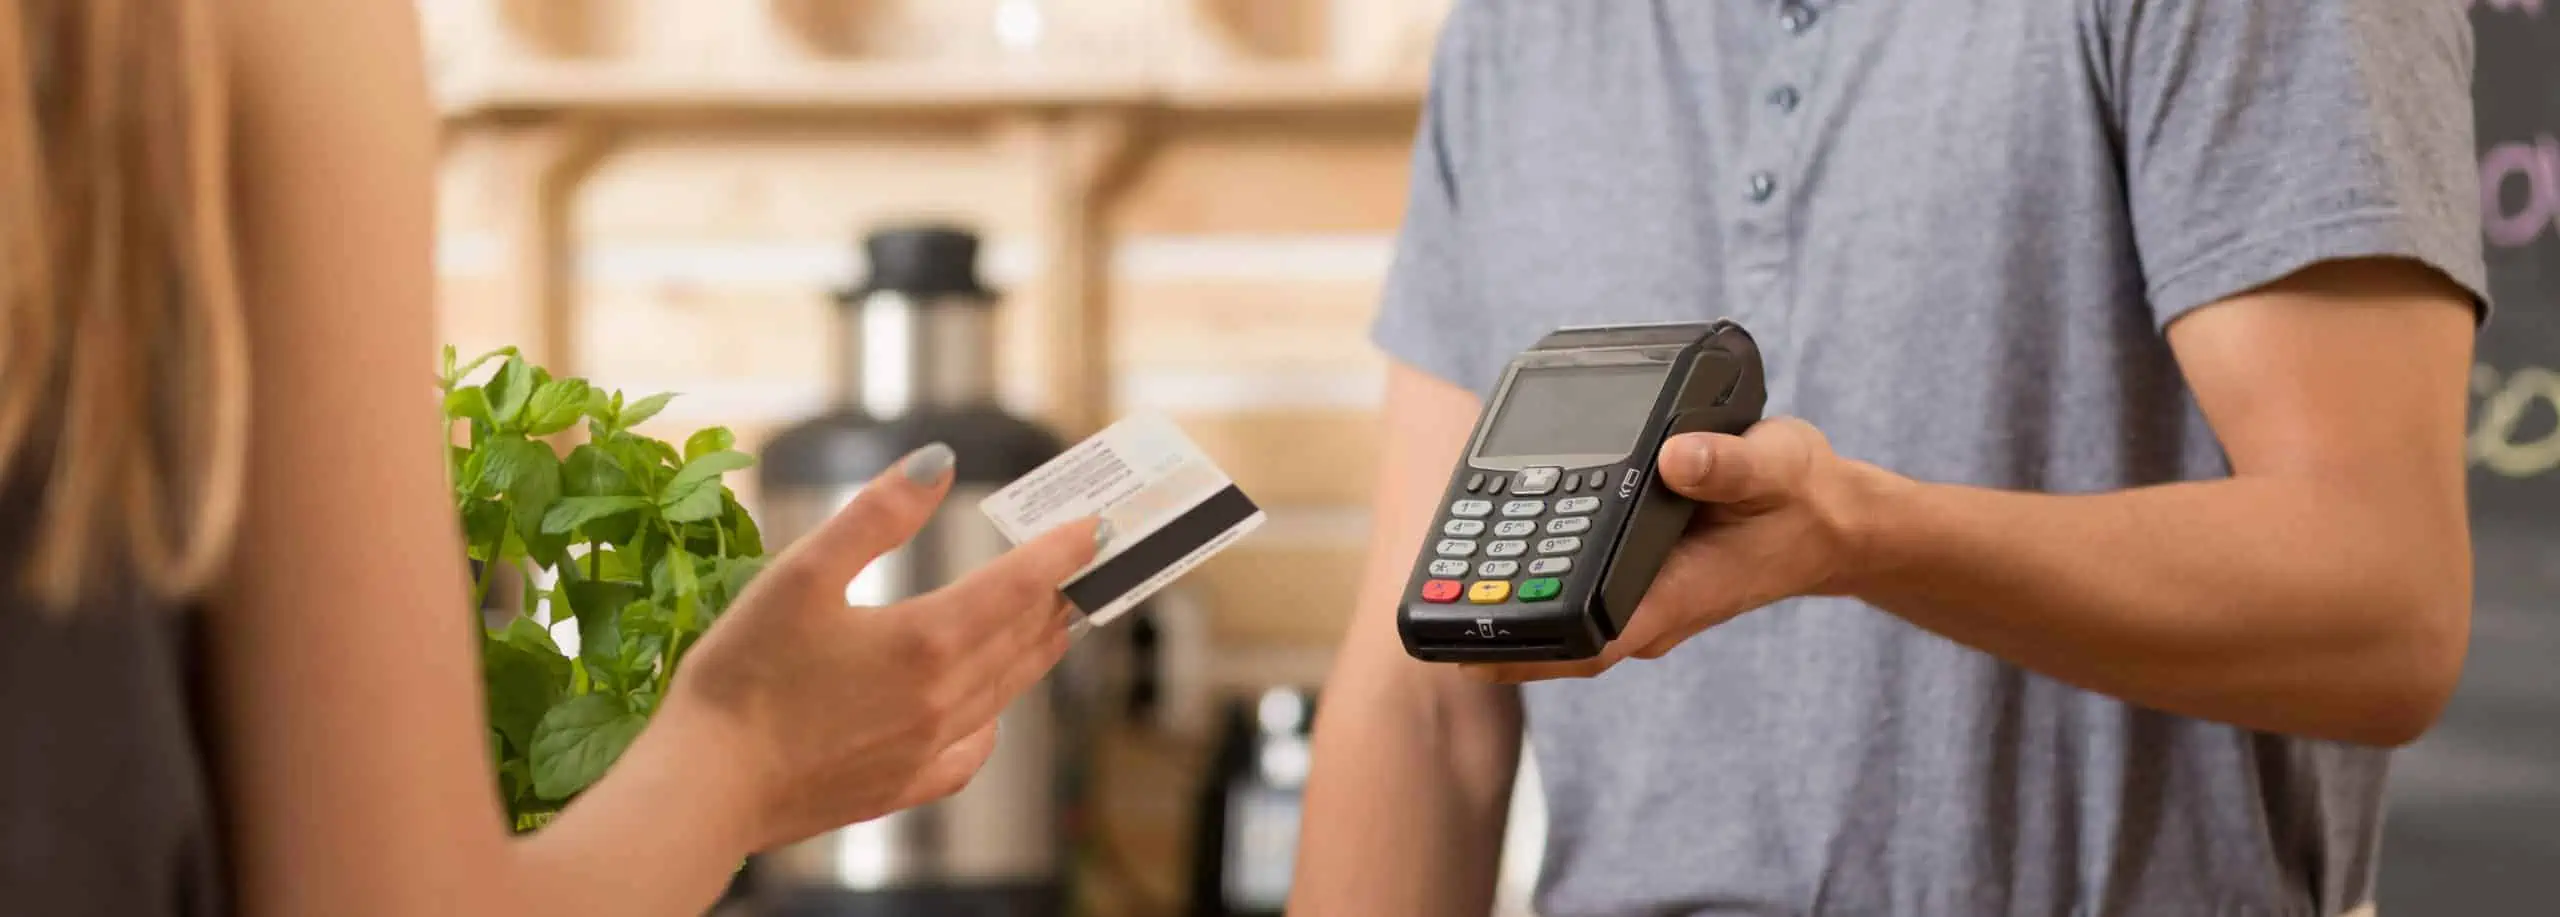 Small business customer paying with debit card